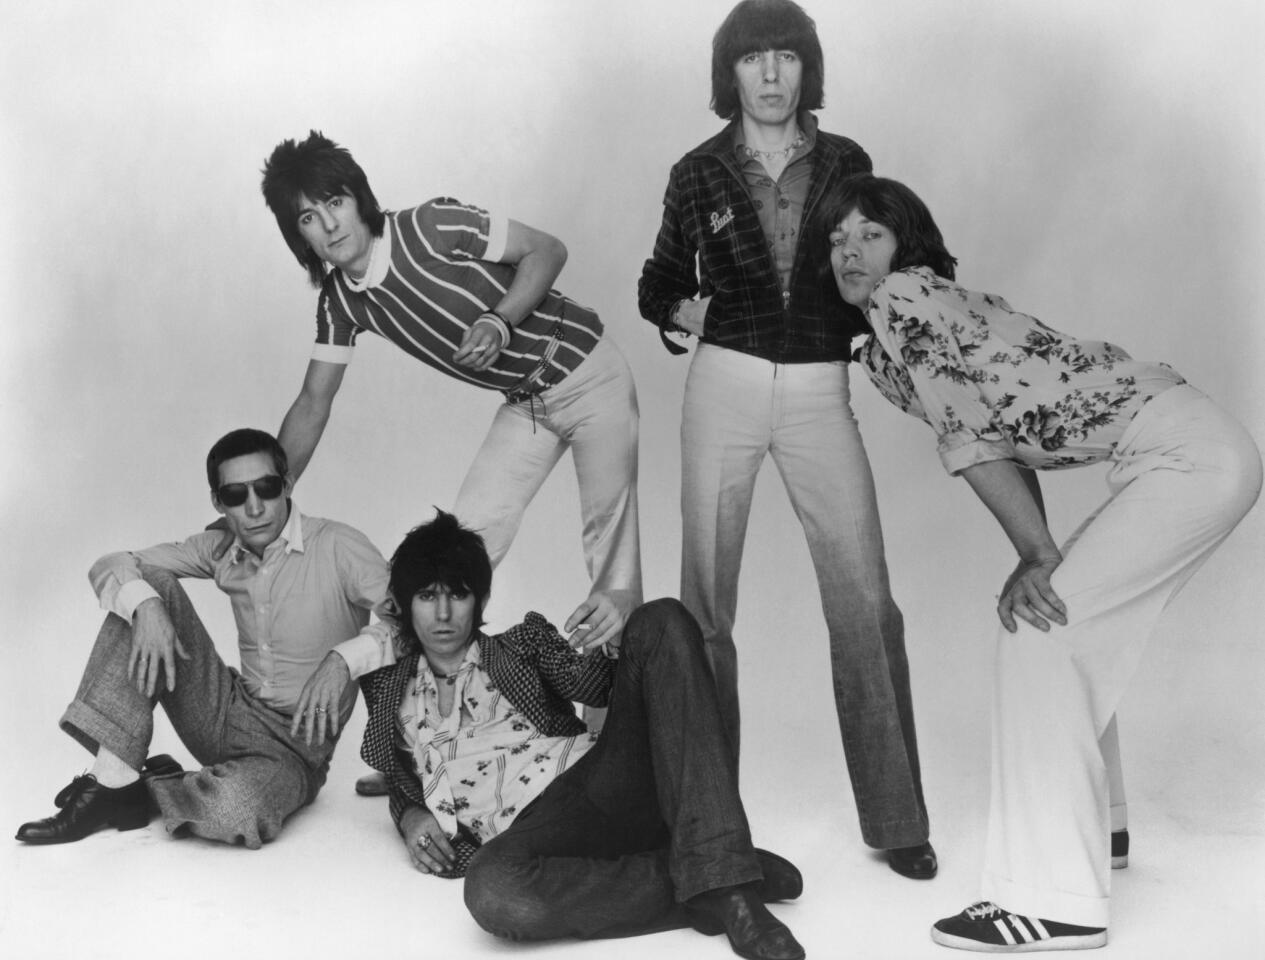 50th anniversary of the Rolling Stones' first gig